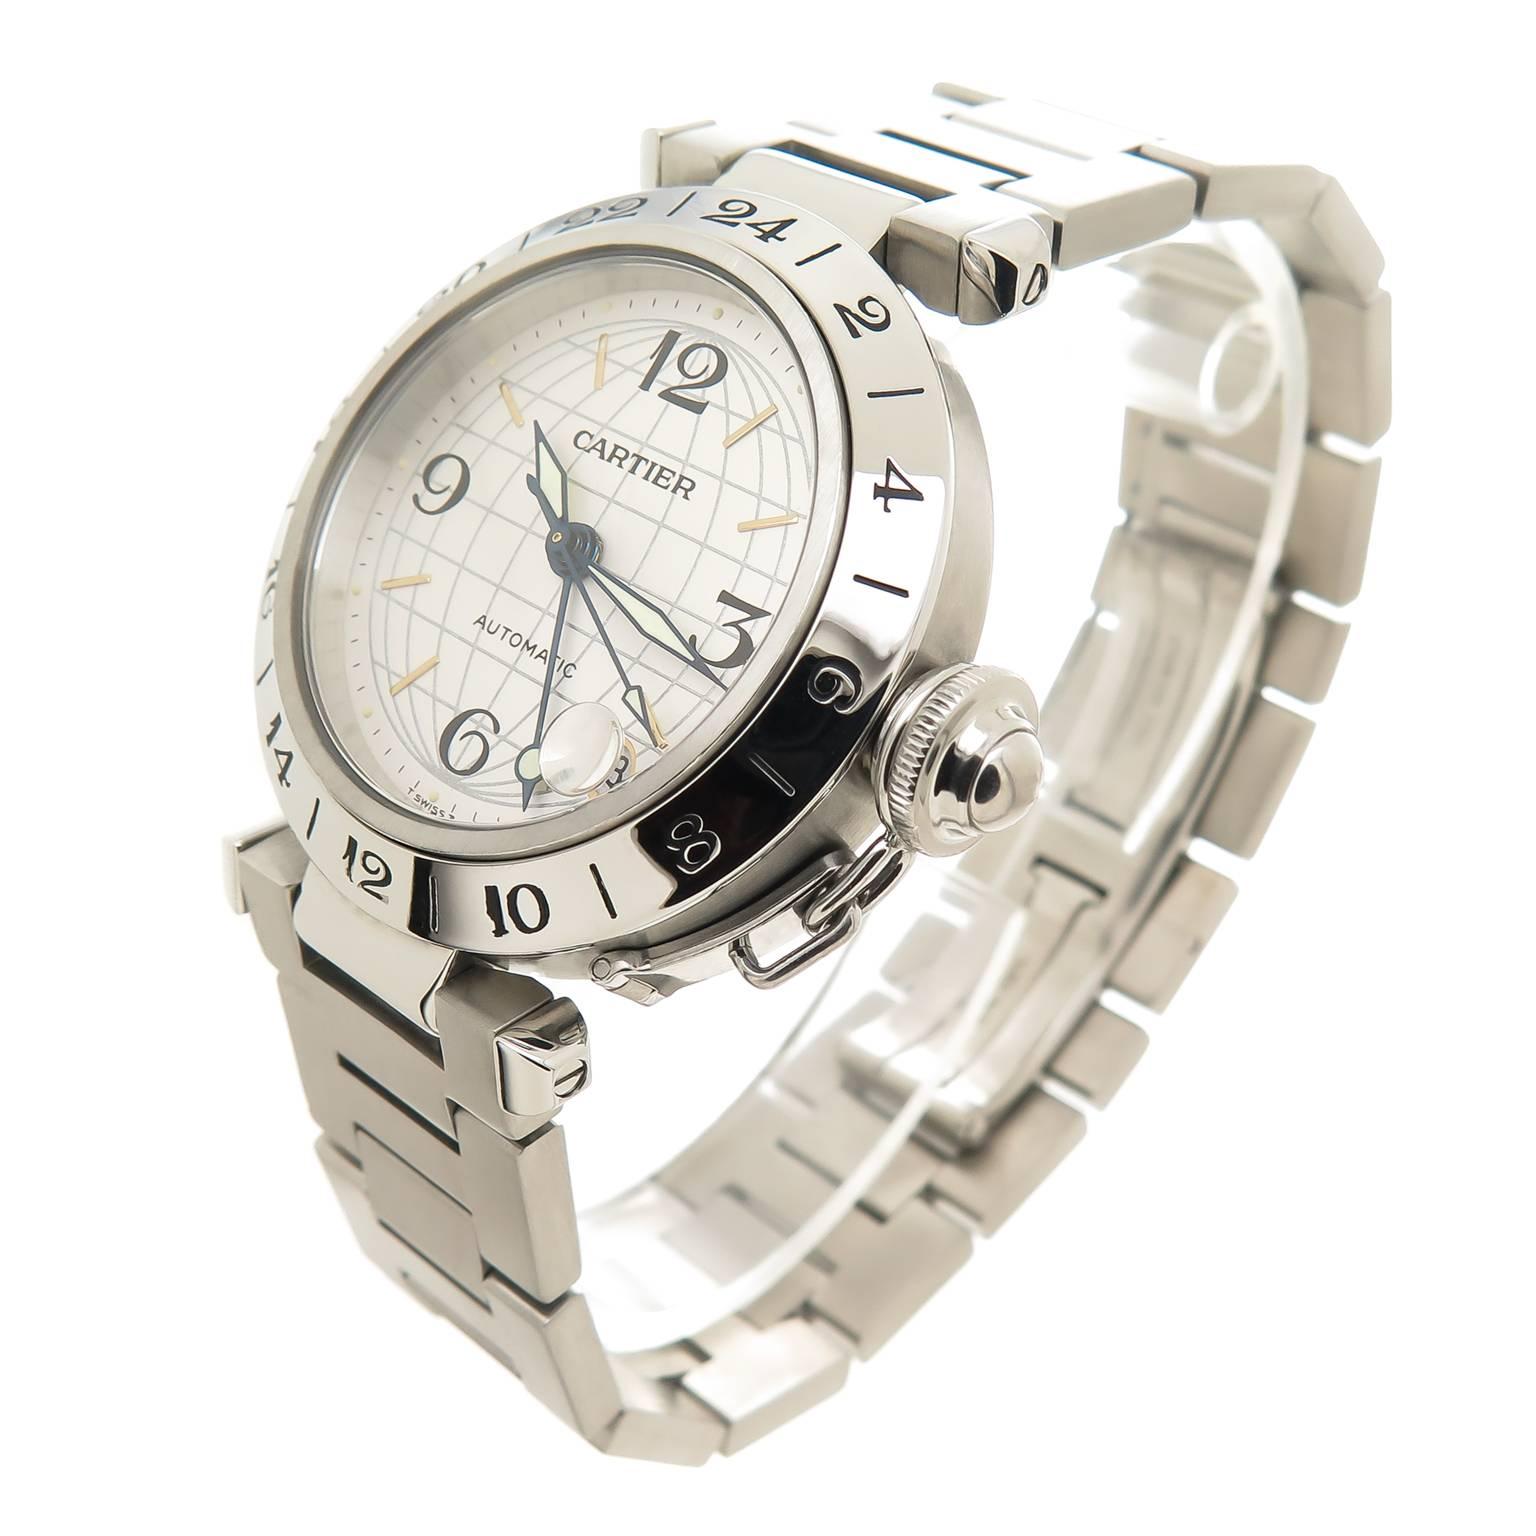 Circa 2000 Cartier Pasha C GMT, 35 MM Stainless Steel water resistant case with crown guard, Automatic, Self Winding Movement, Silver, Globe Dial with center sweep hand and a calendar window at the 5 position.3/4 inch wide Steel link bracelet with